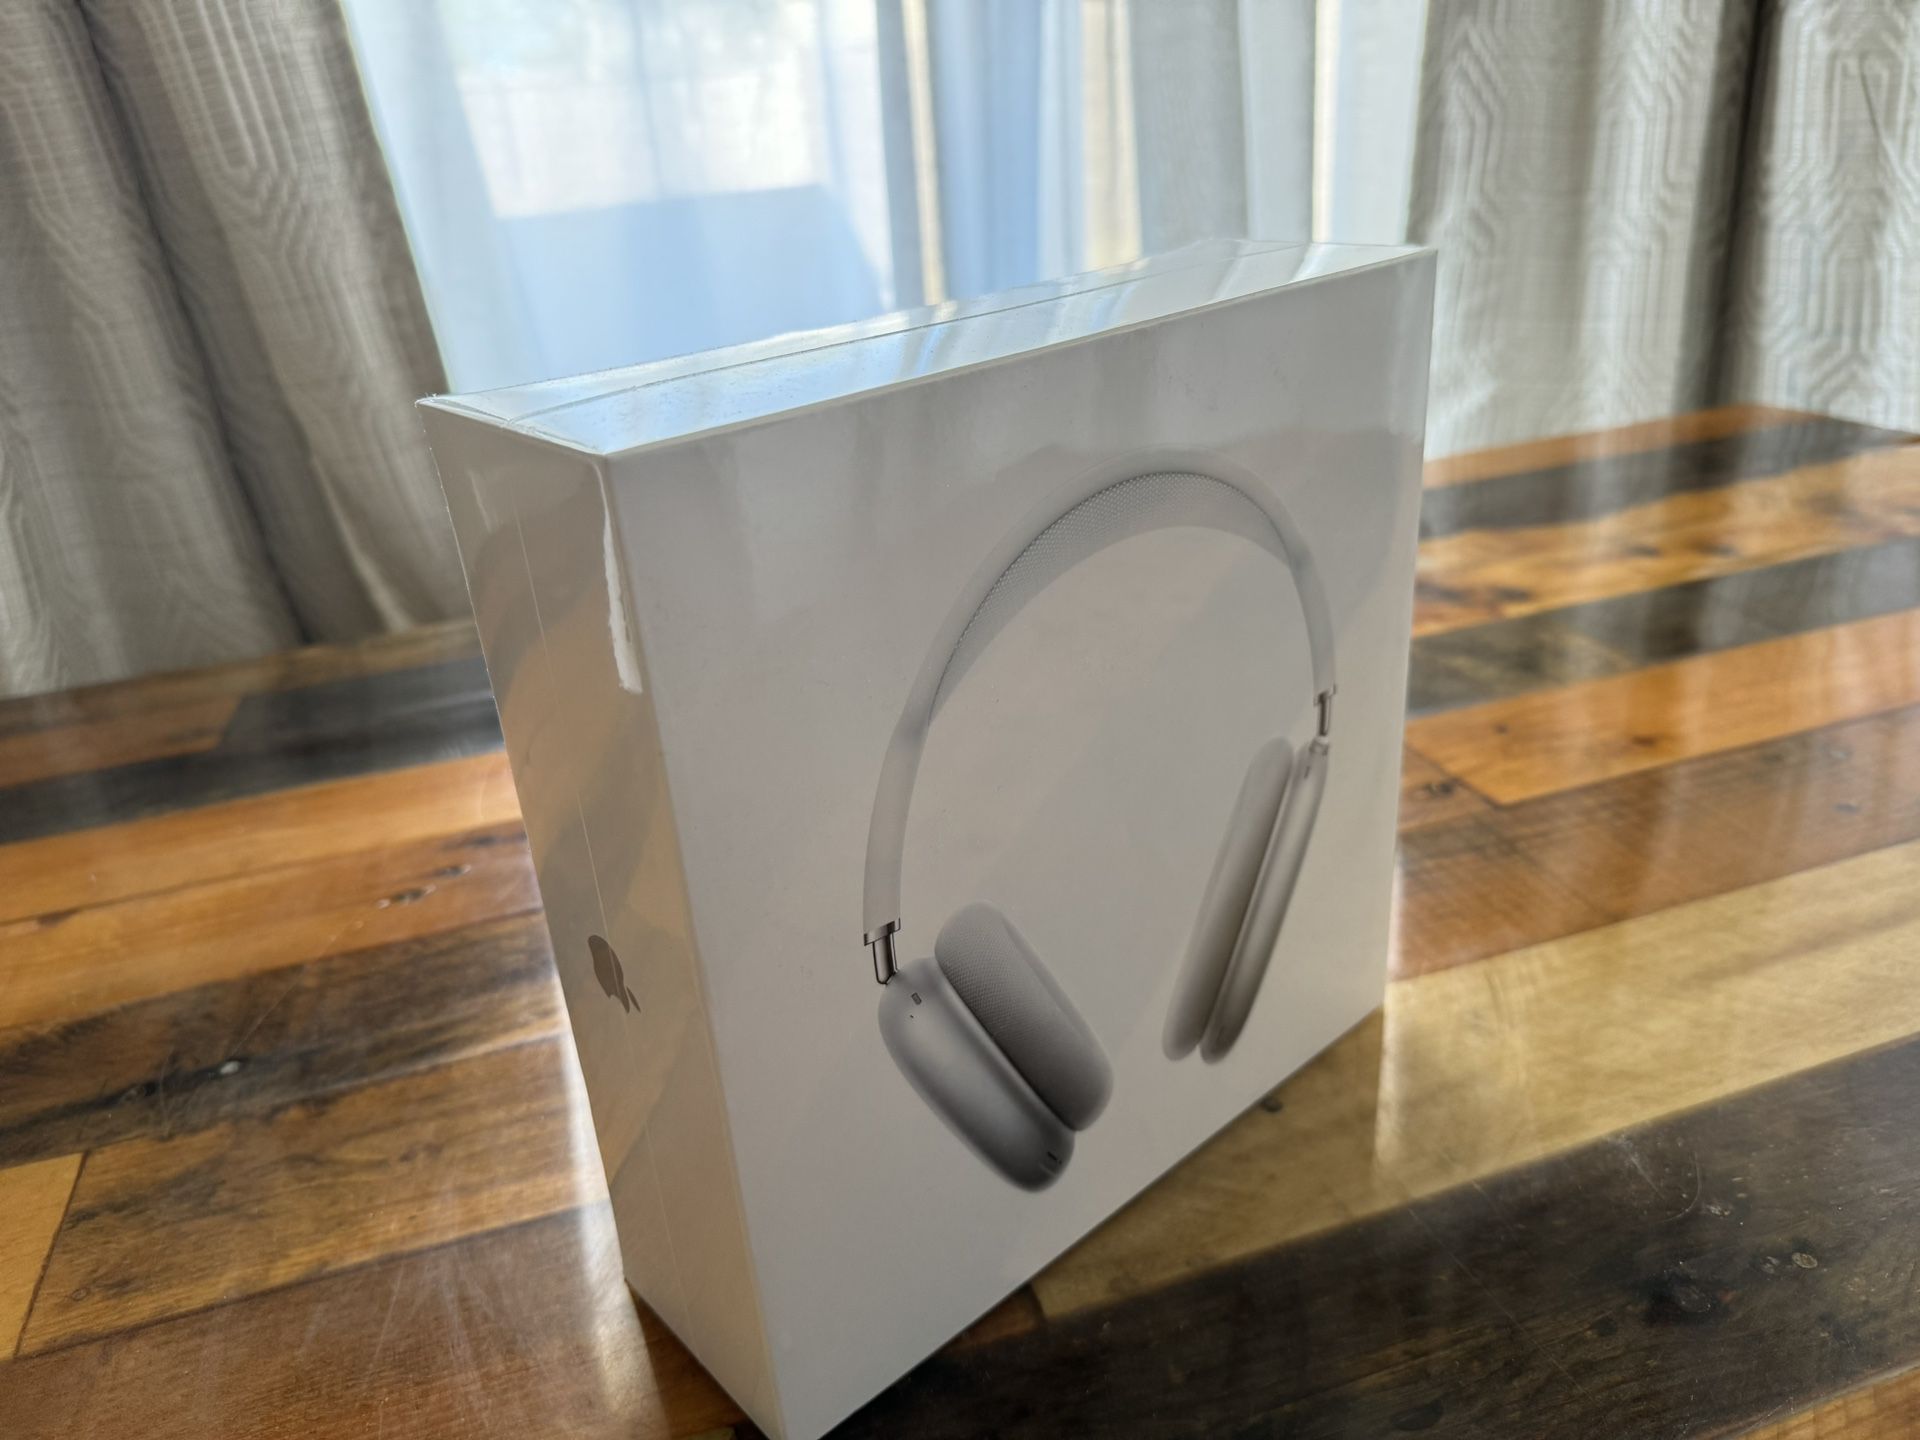 Apple AirPods Max (Brand New - Never Opened)